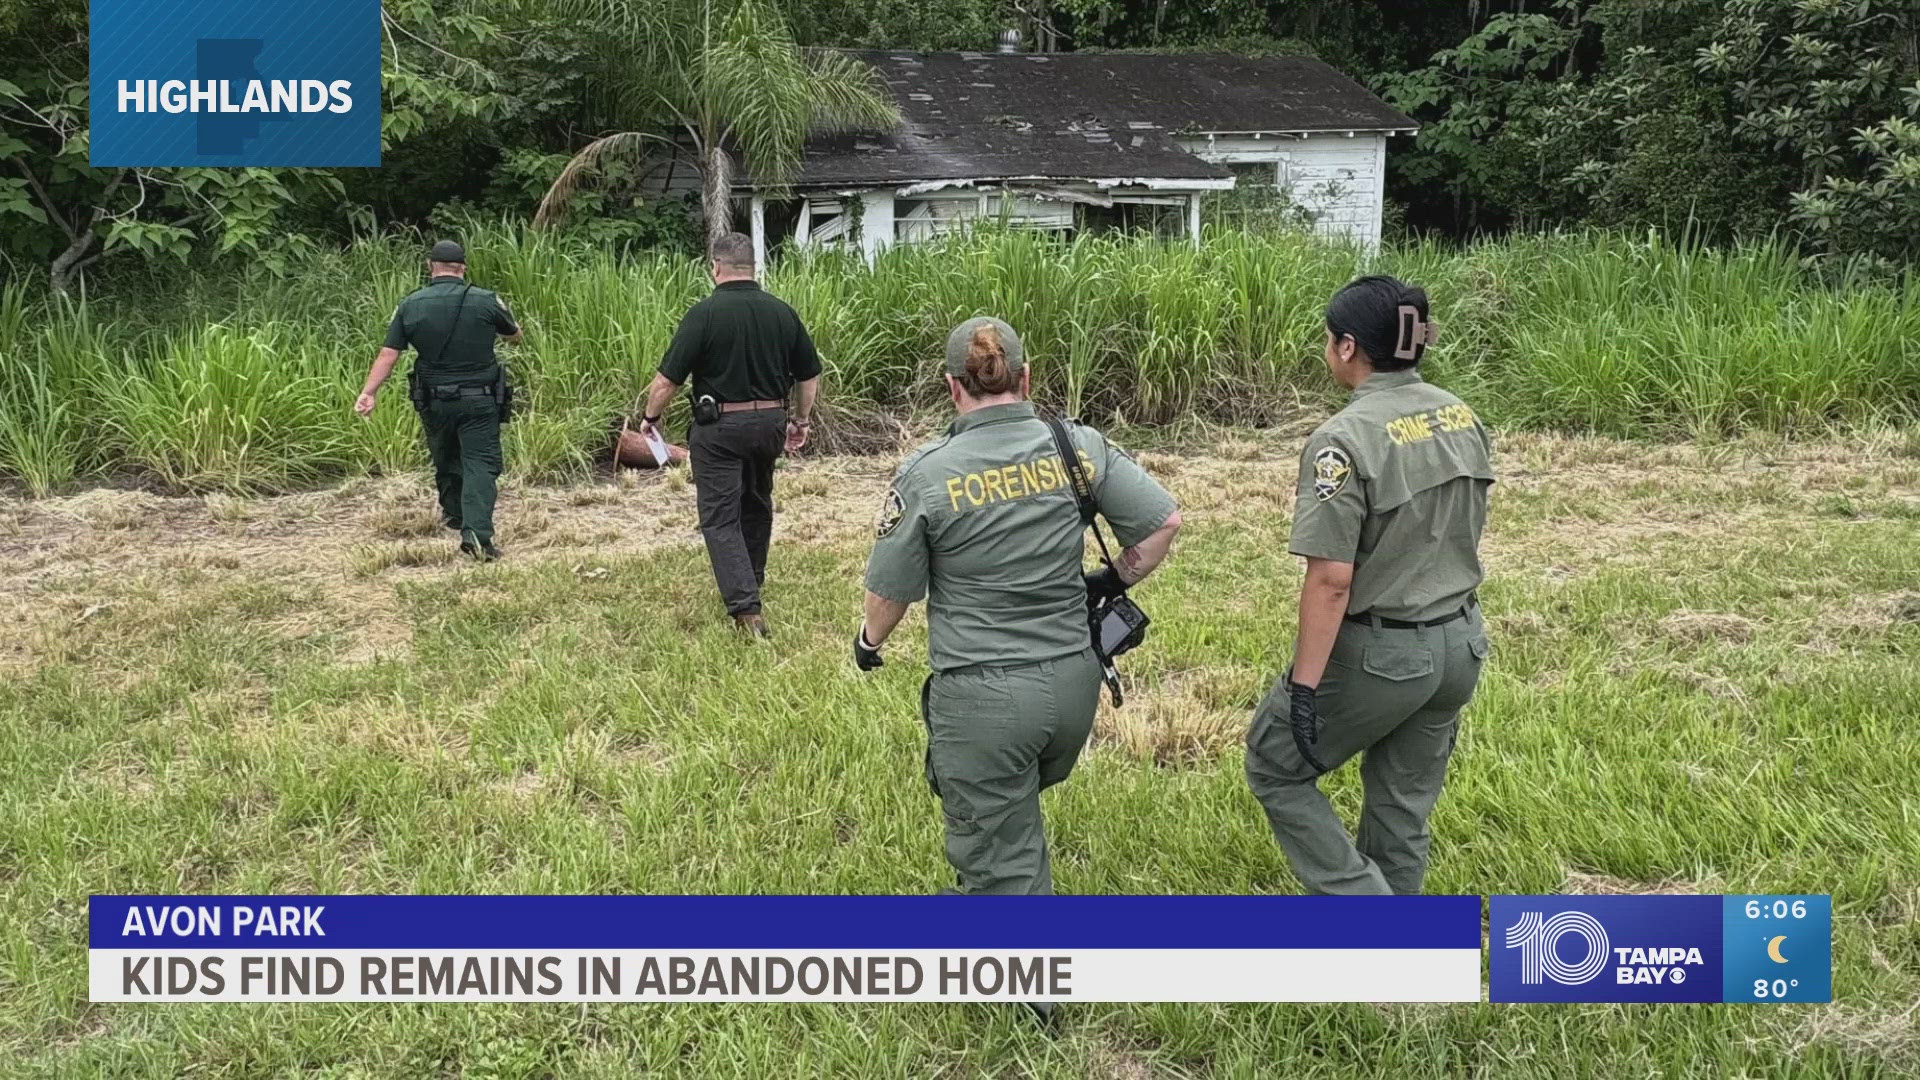 The remains had reportedly been at the home for a year, according to deputies.